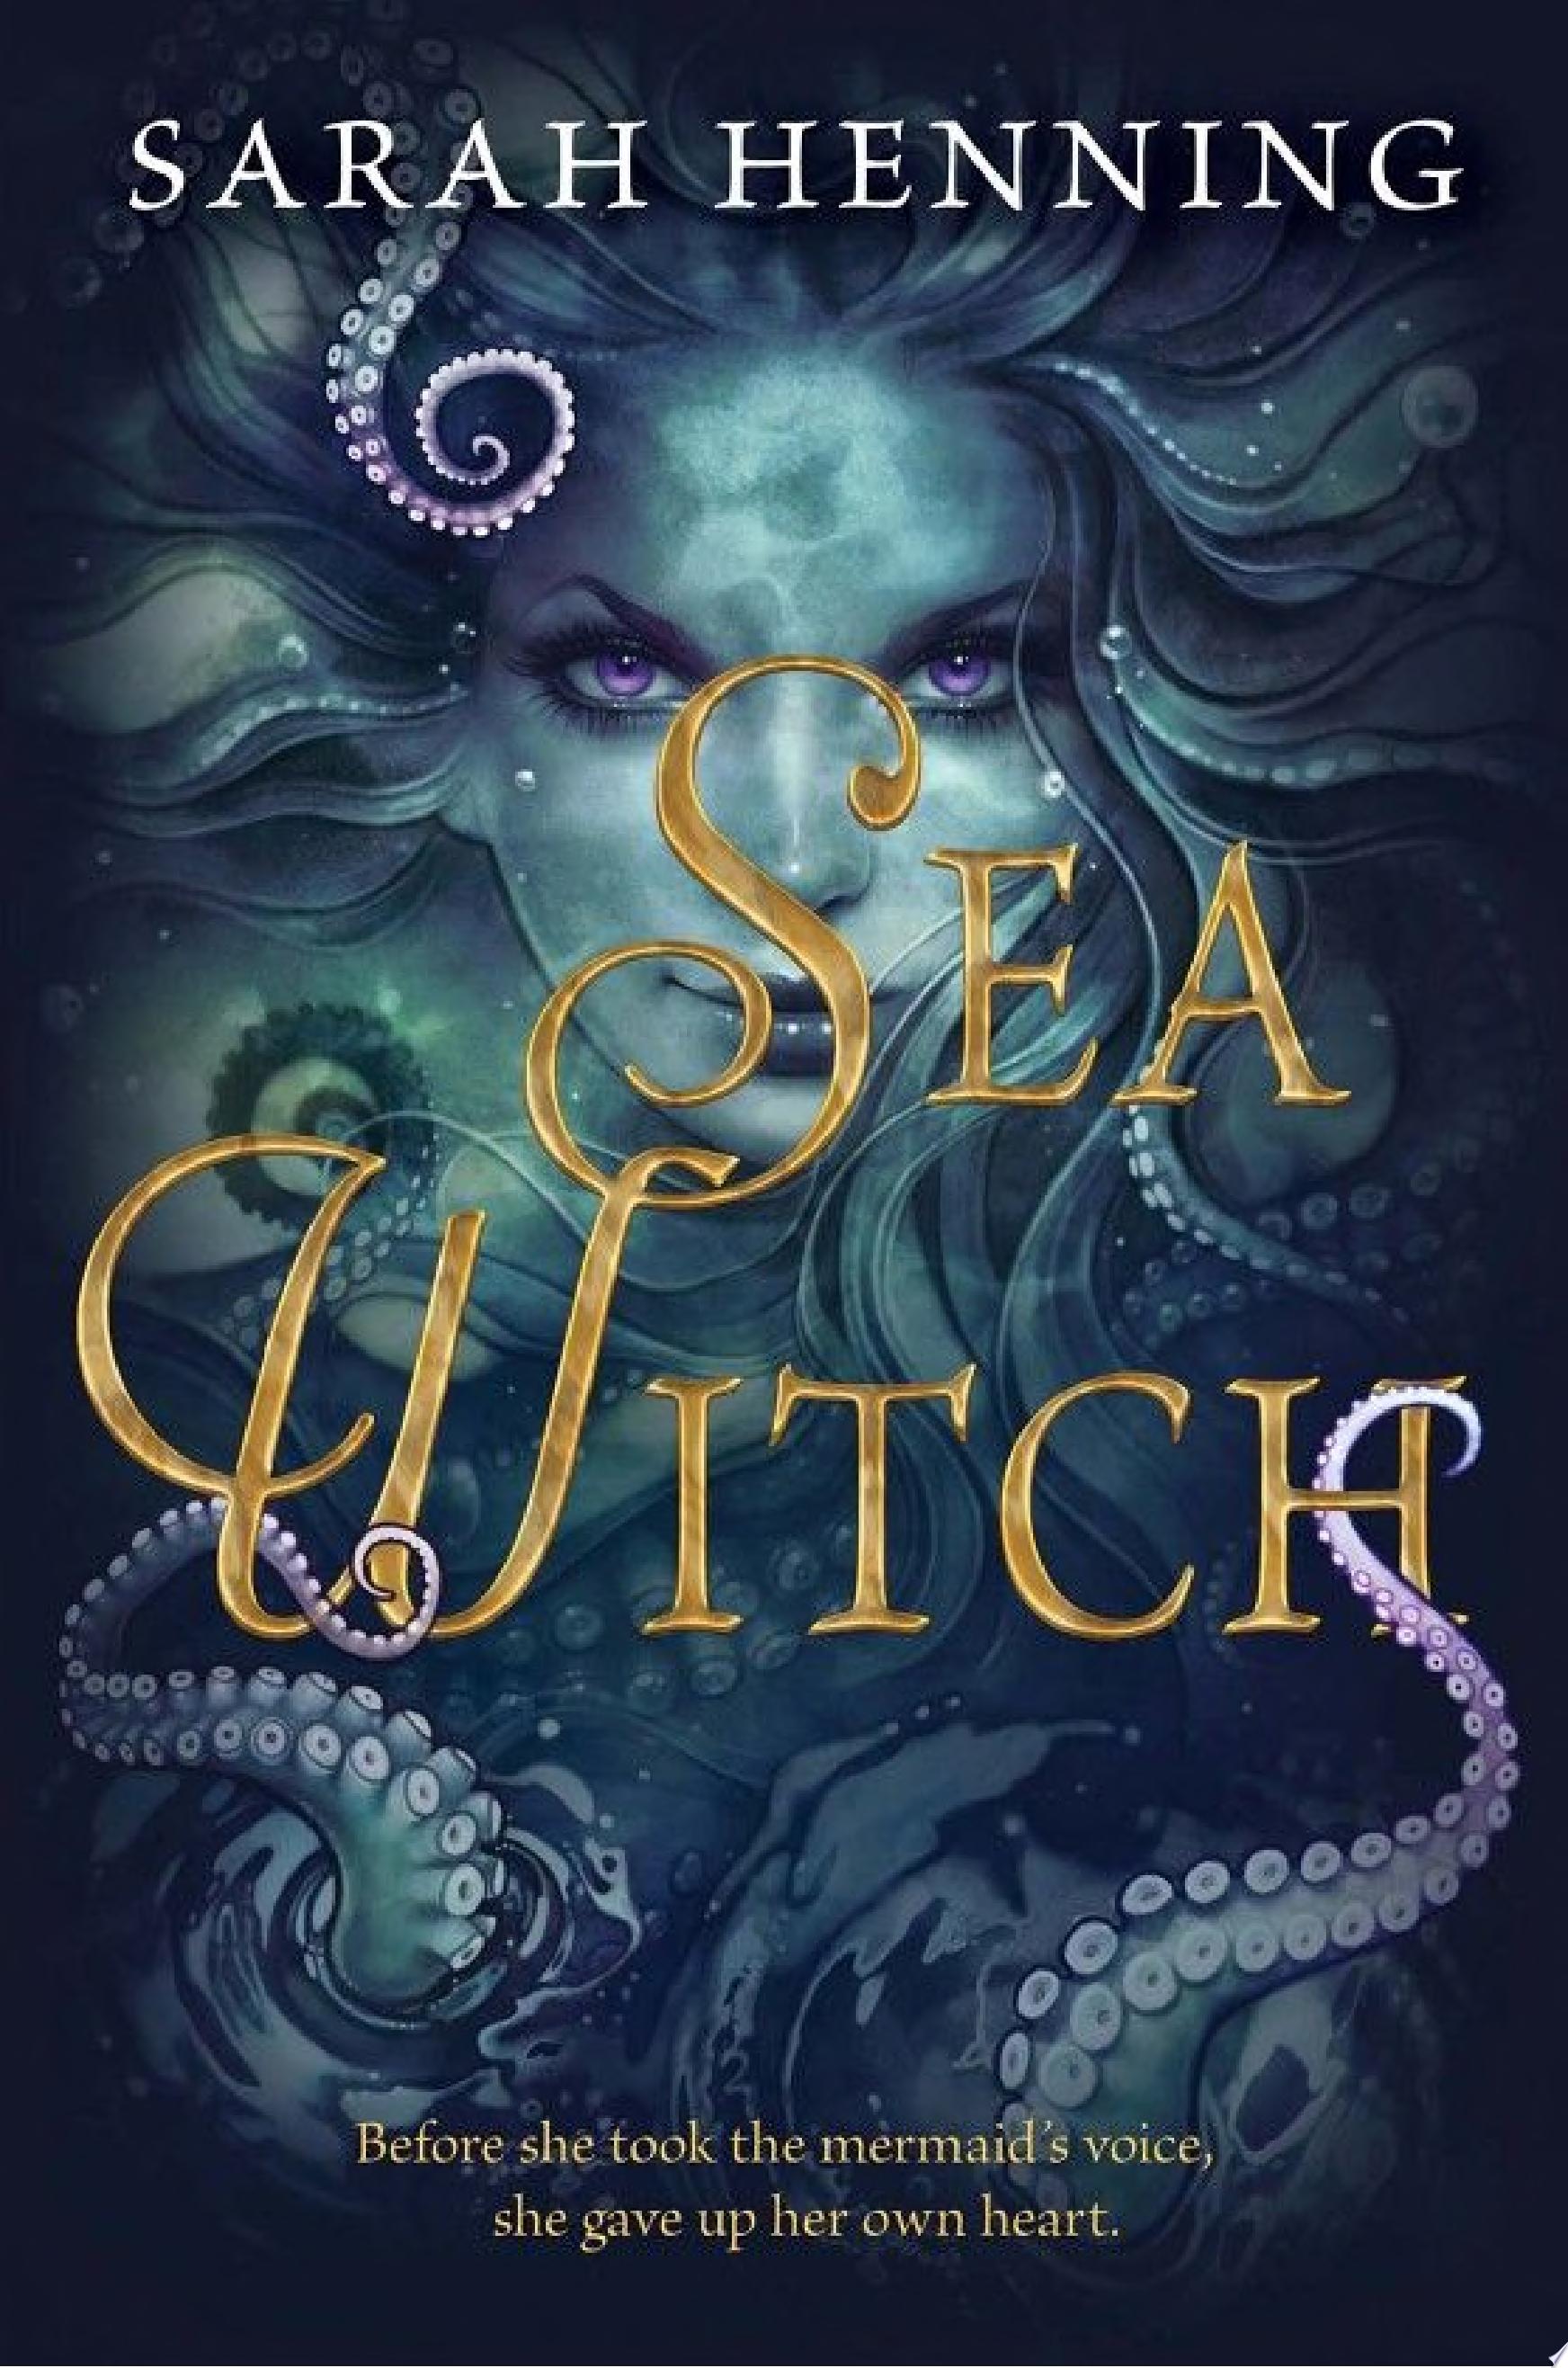 Image for "Sea Witch"